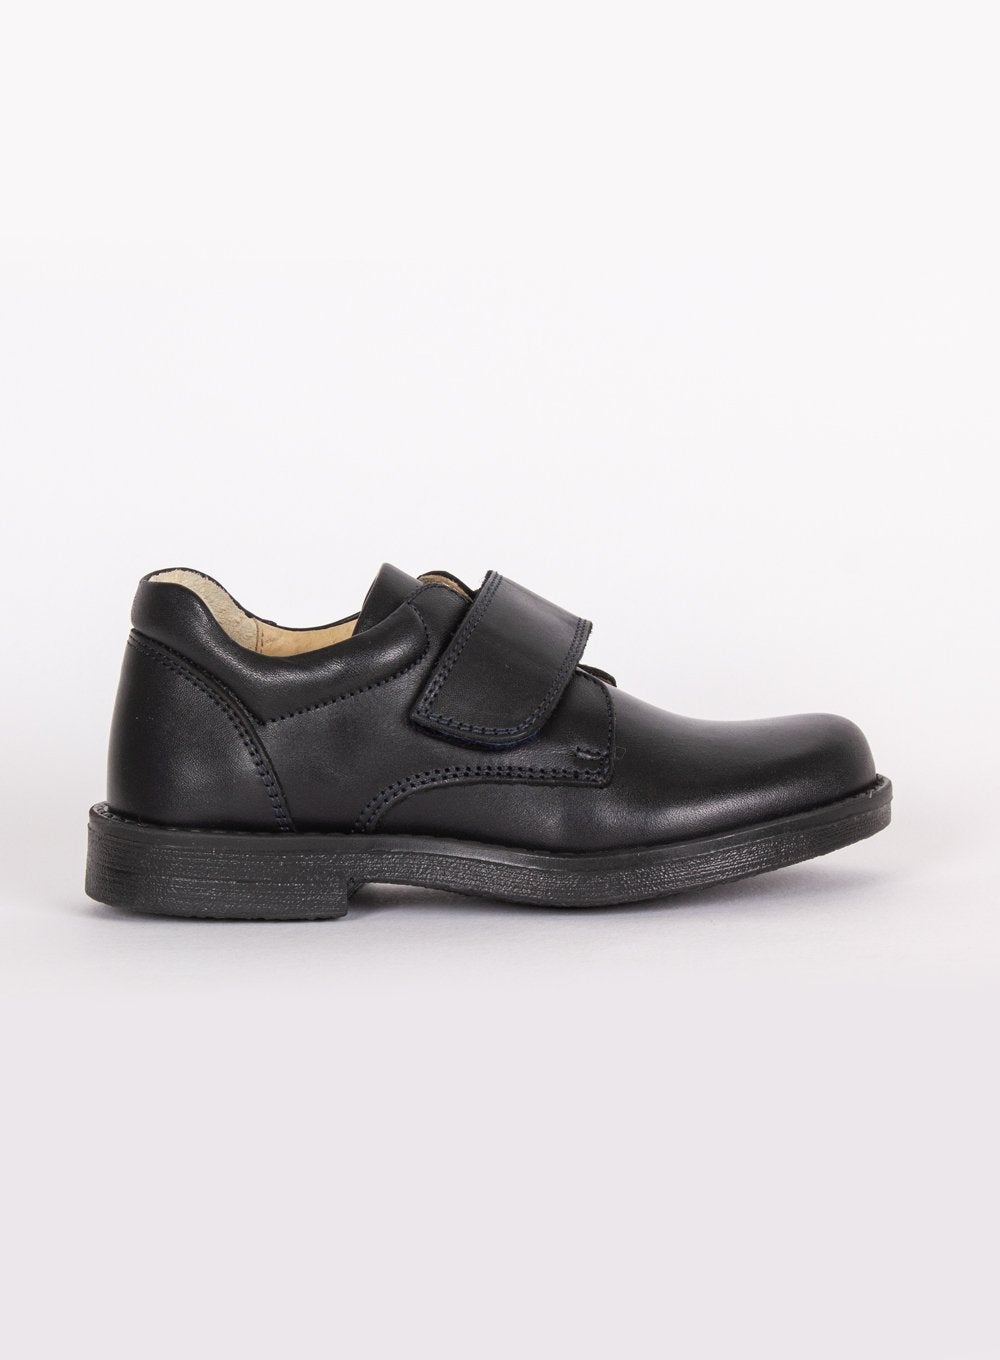 Hampton Classics George School Shoes in Navy | Trotters